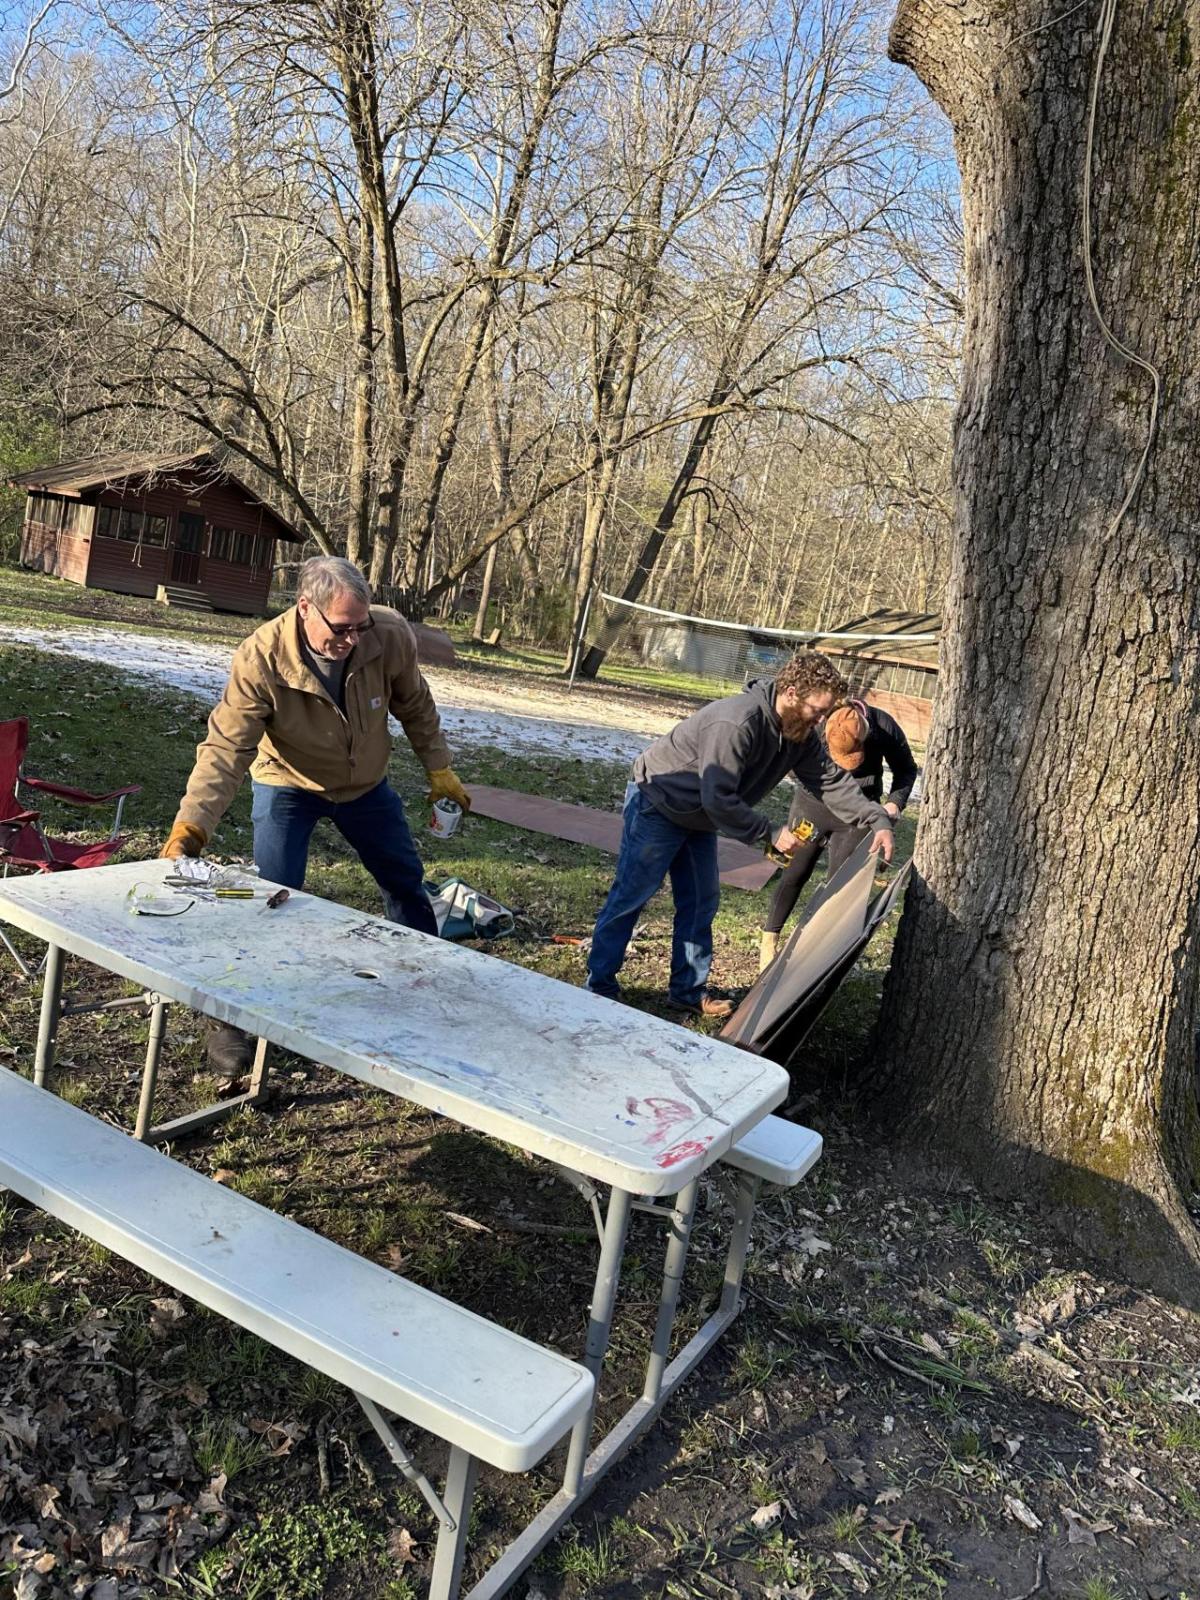 People working near a picnic table